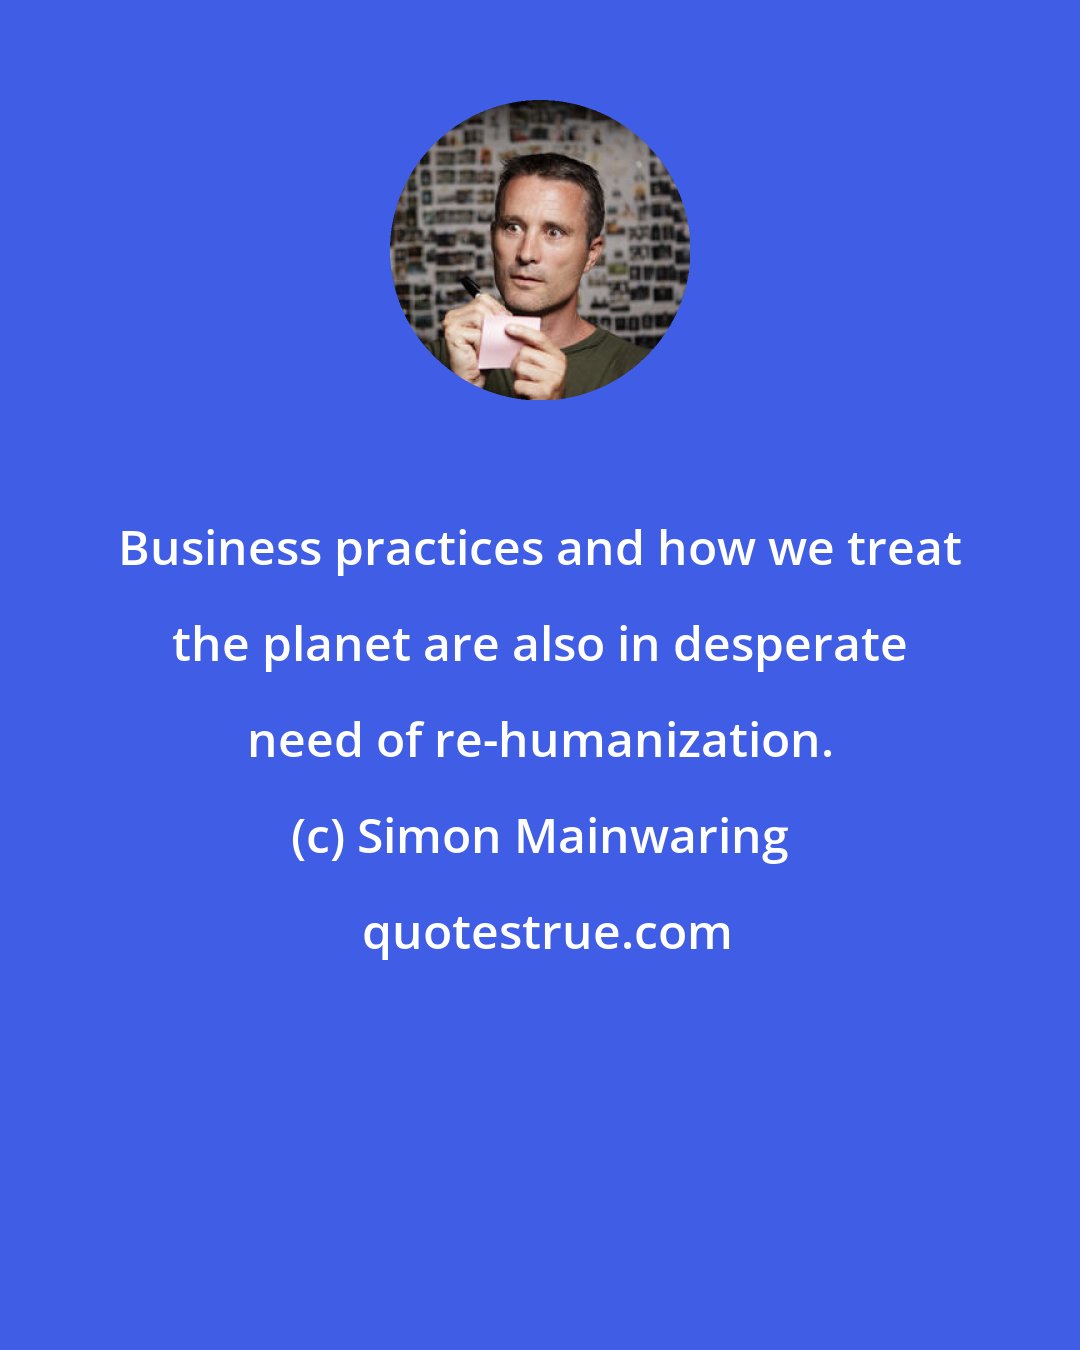 Simon Mainwaring: Business practices and how we treat the planet are also in desperate need of re-humanization.